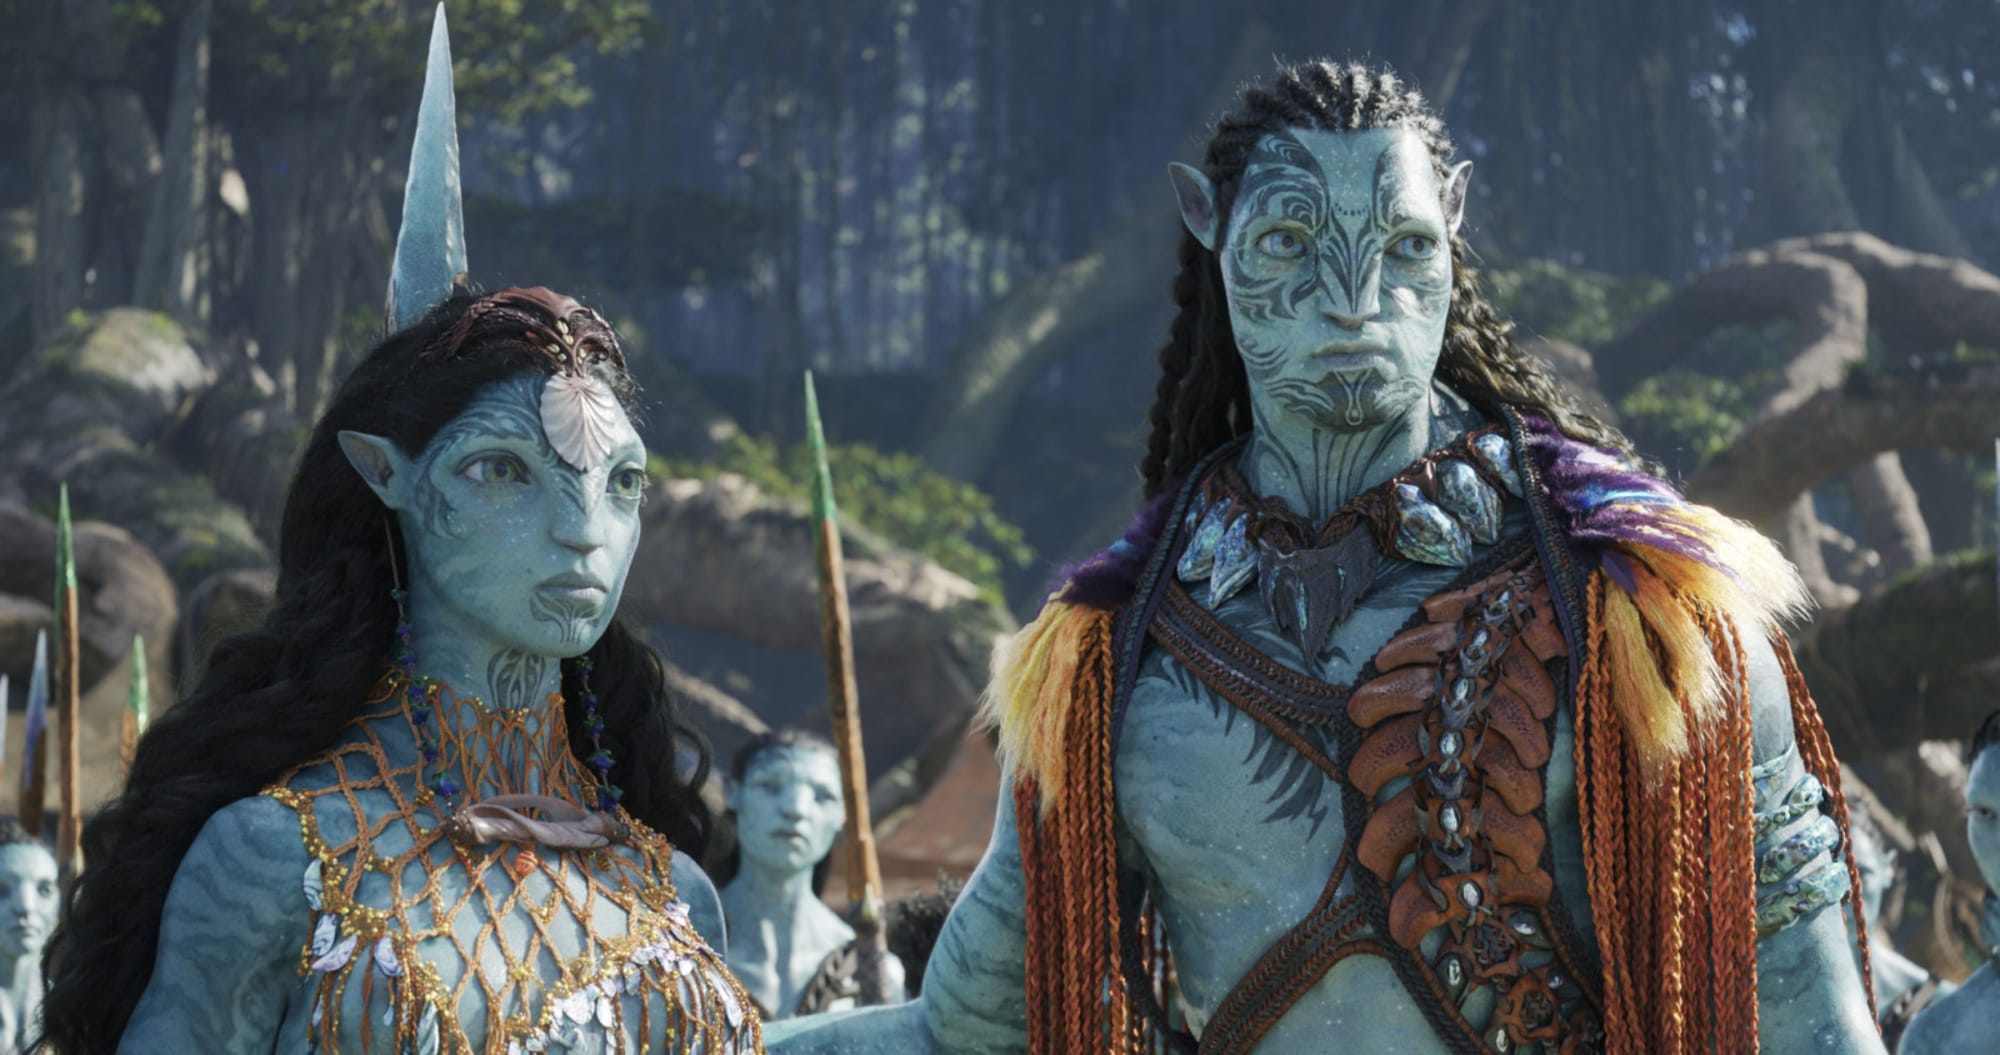 Avatar: The Way of Water: When is the new Avatar movie coming out?